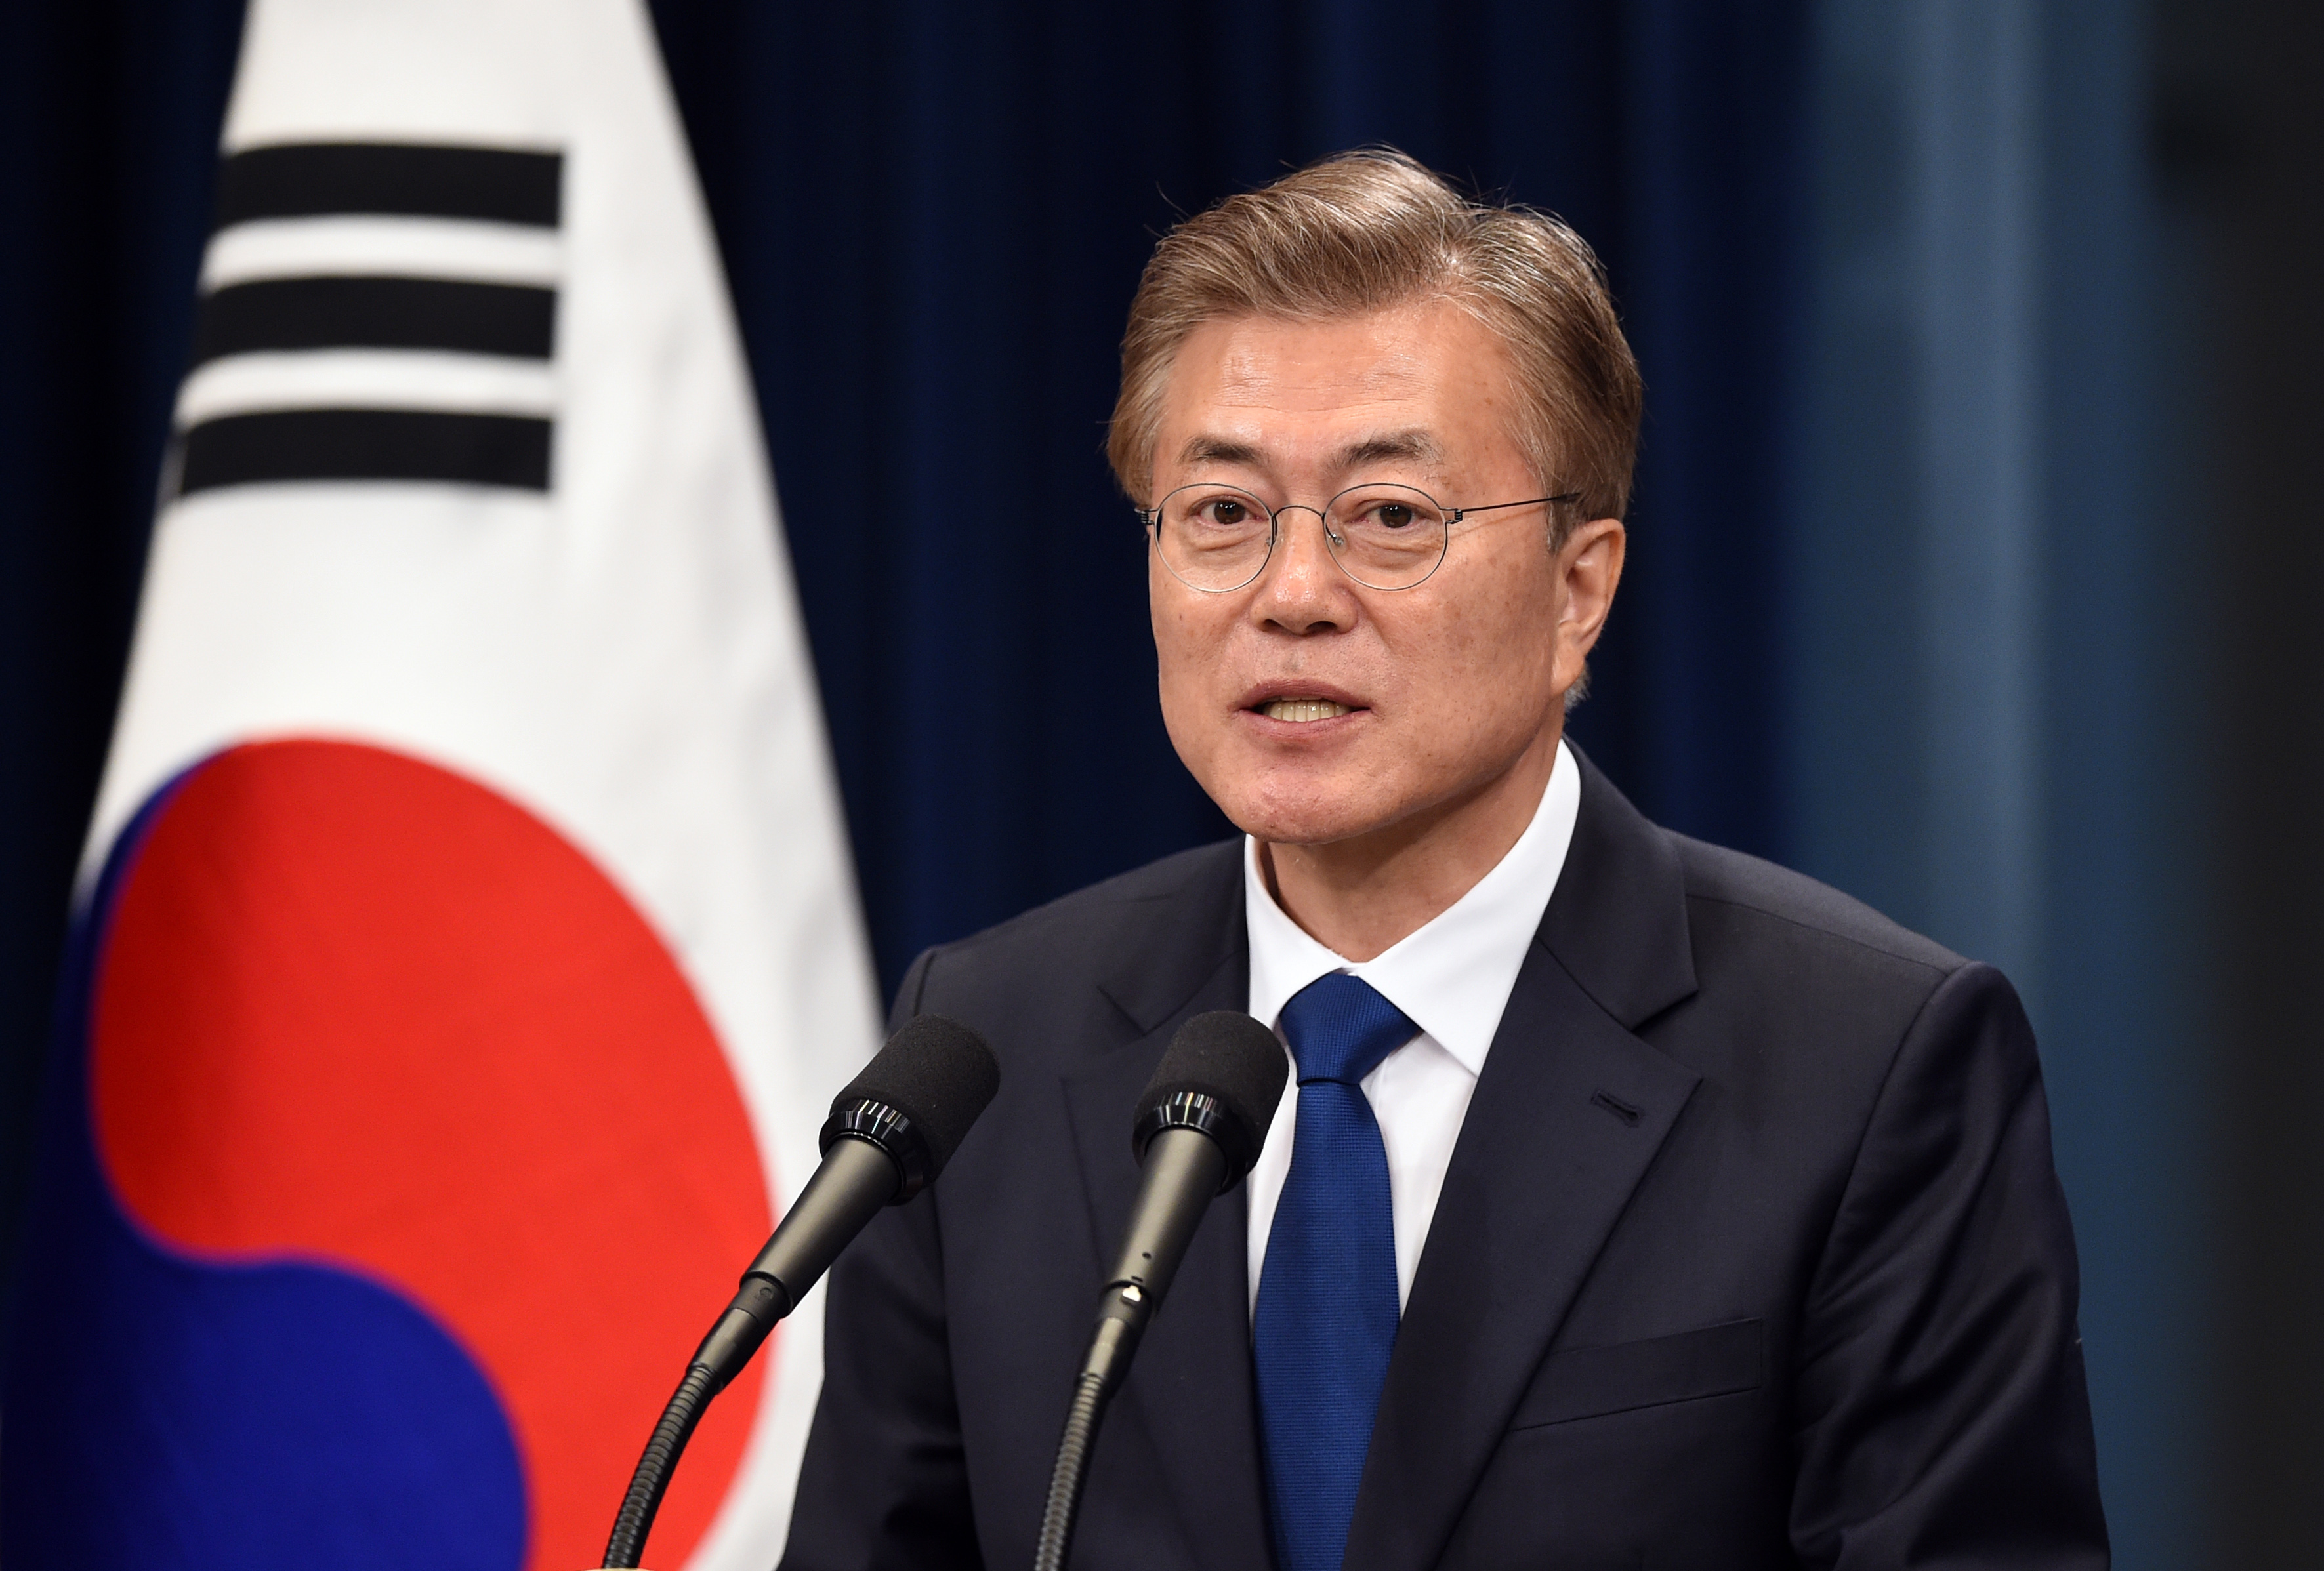 South Korea’s President Reaffirms 12 GW of Offshore Wind by 2030 Goal